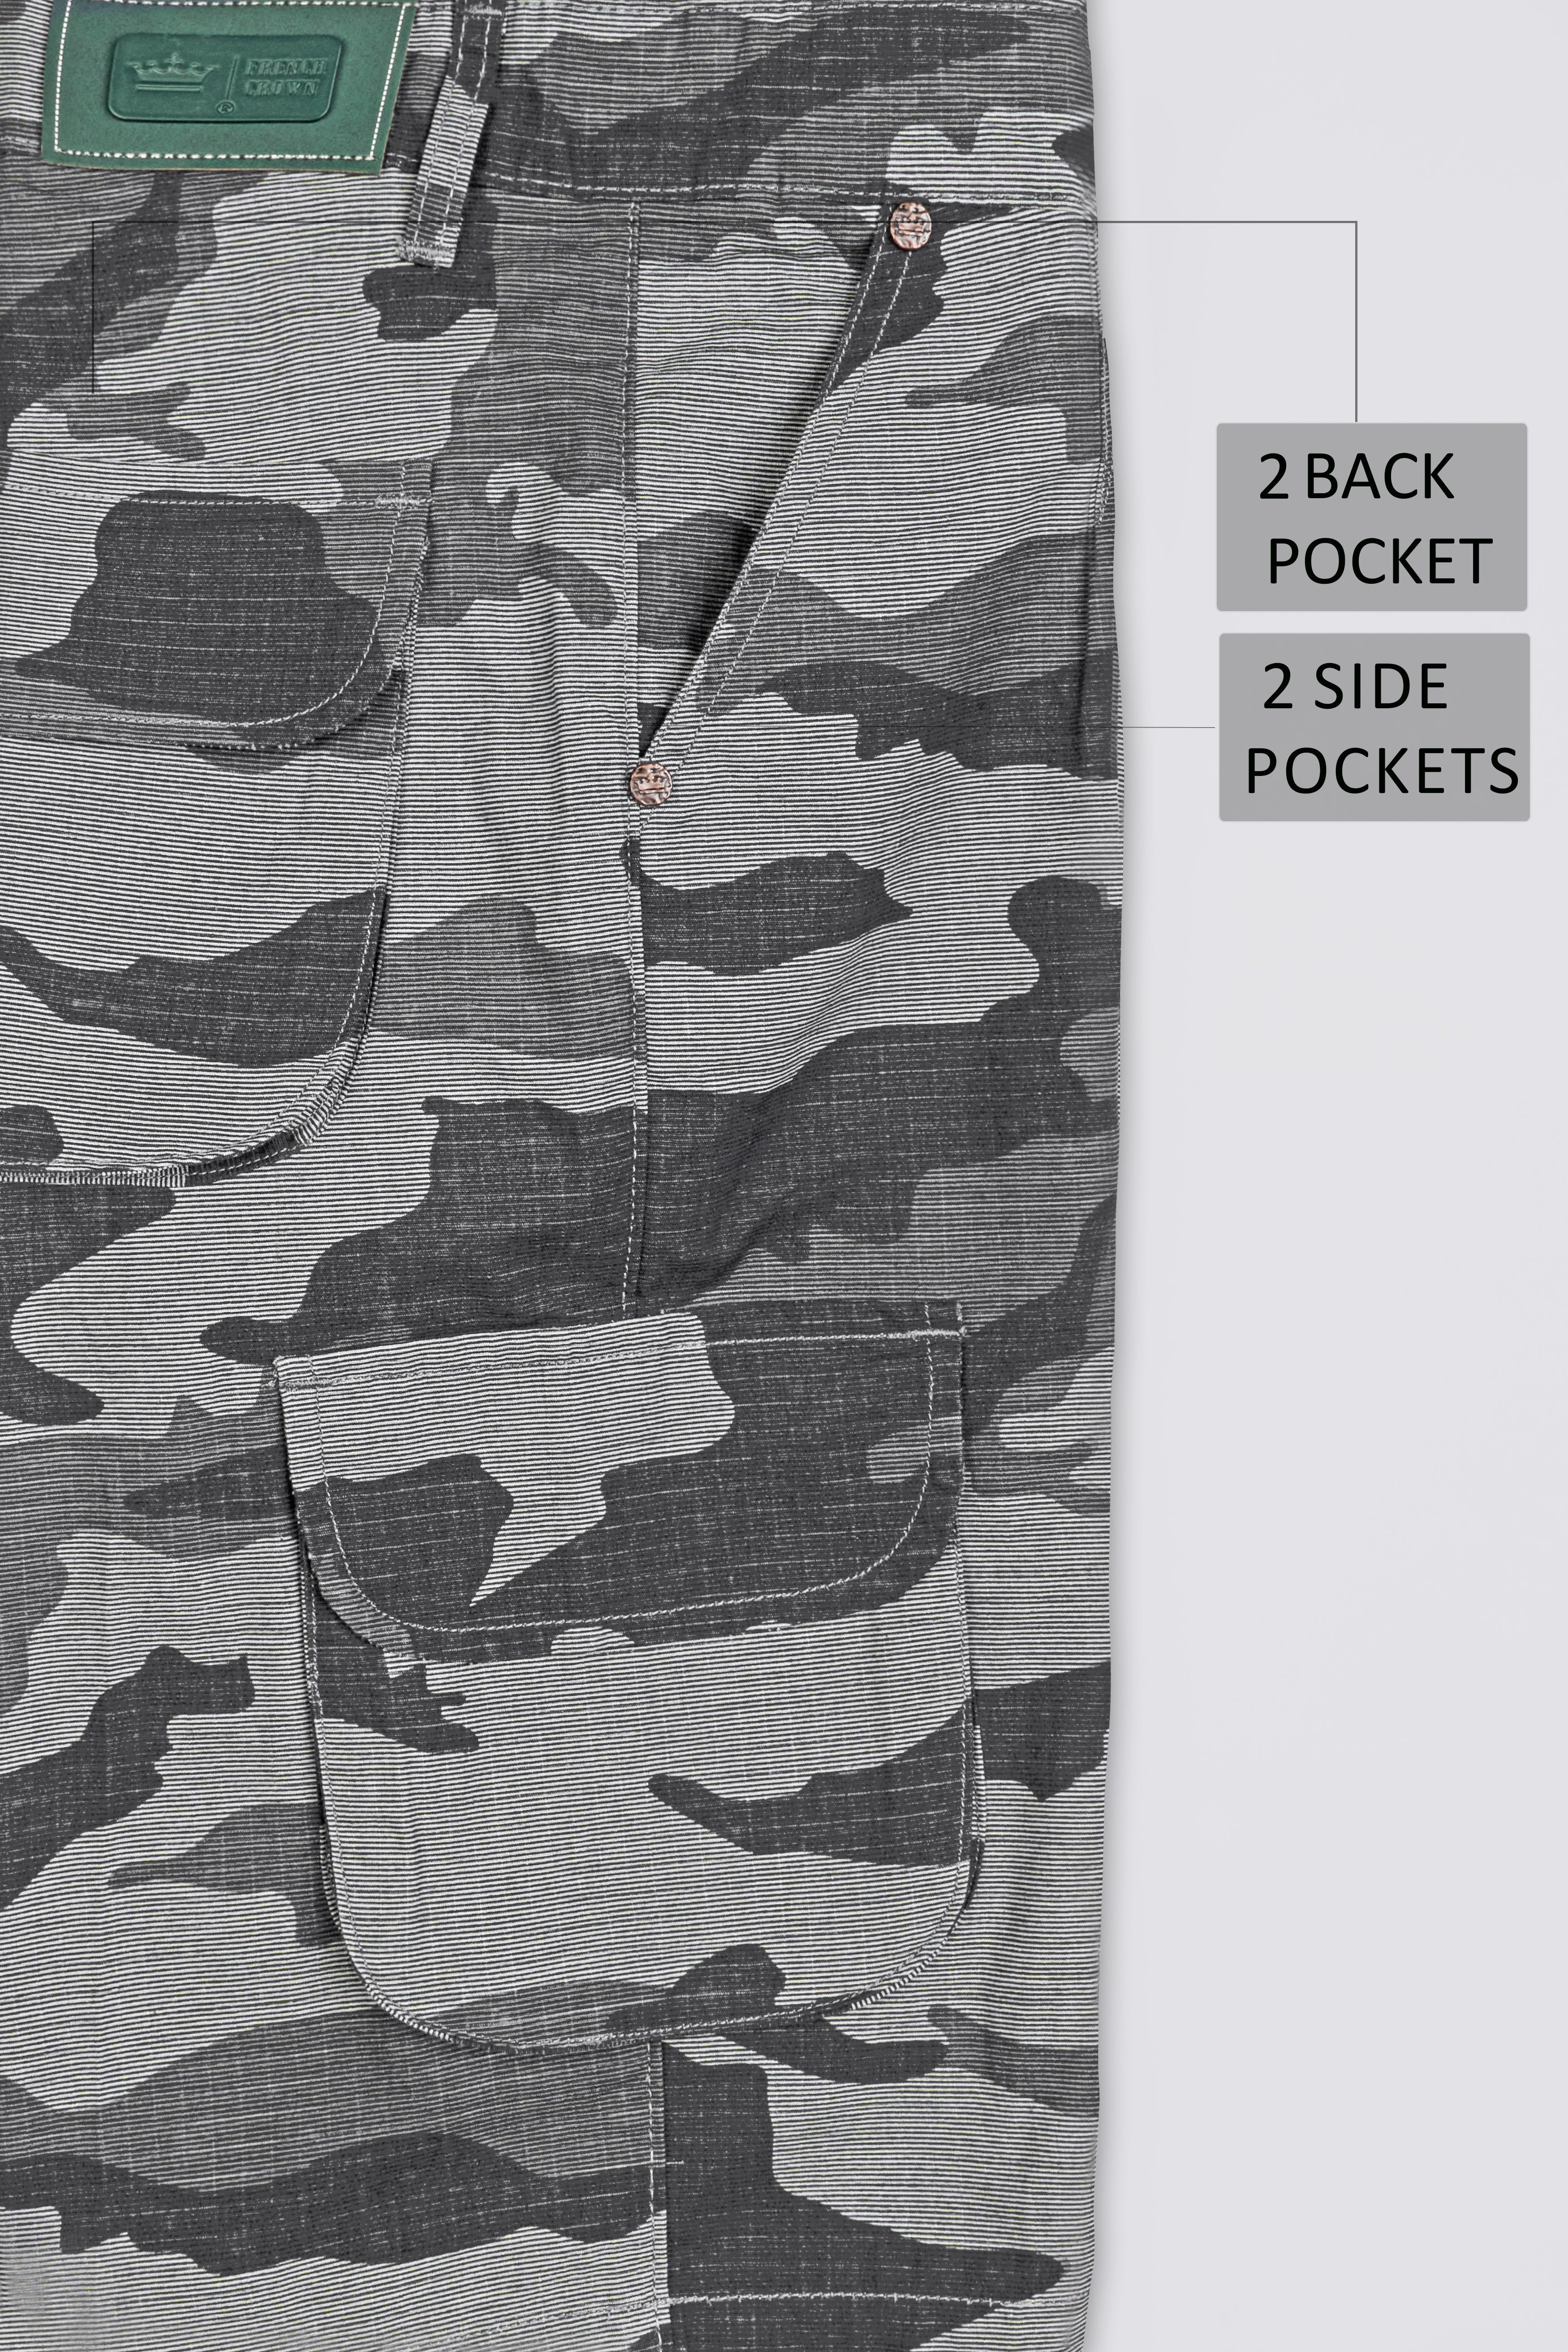 Abbey Gray and White Camouflage Cargo Shorts SR271-28, SR271-30, SR271-32, SR271-34, SR271-36, SR271-38, SR271-40, SR271-42, SR271-44